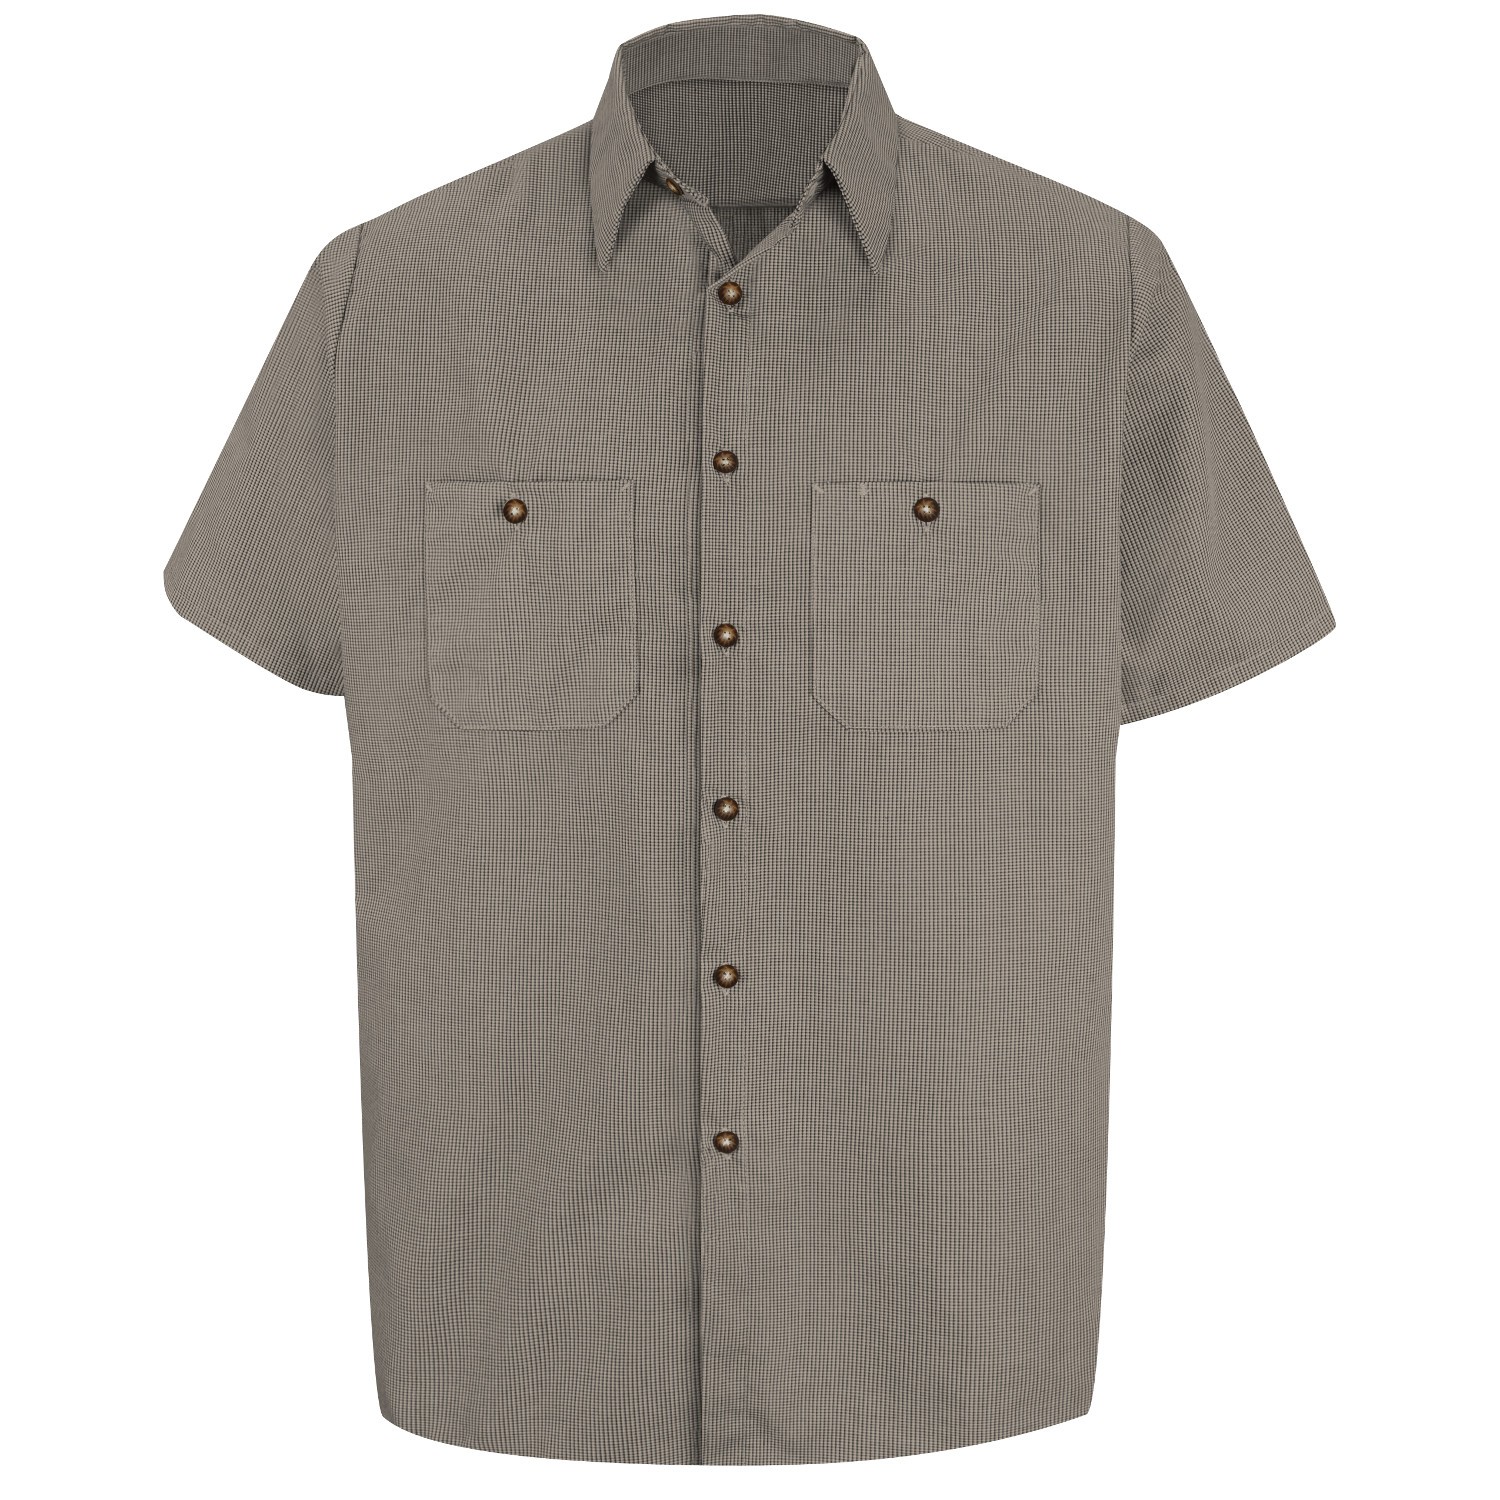 Seeland Preston Mens Shirt sizes available up-to 4XL 